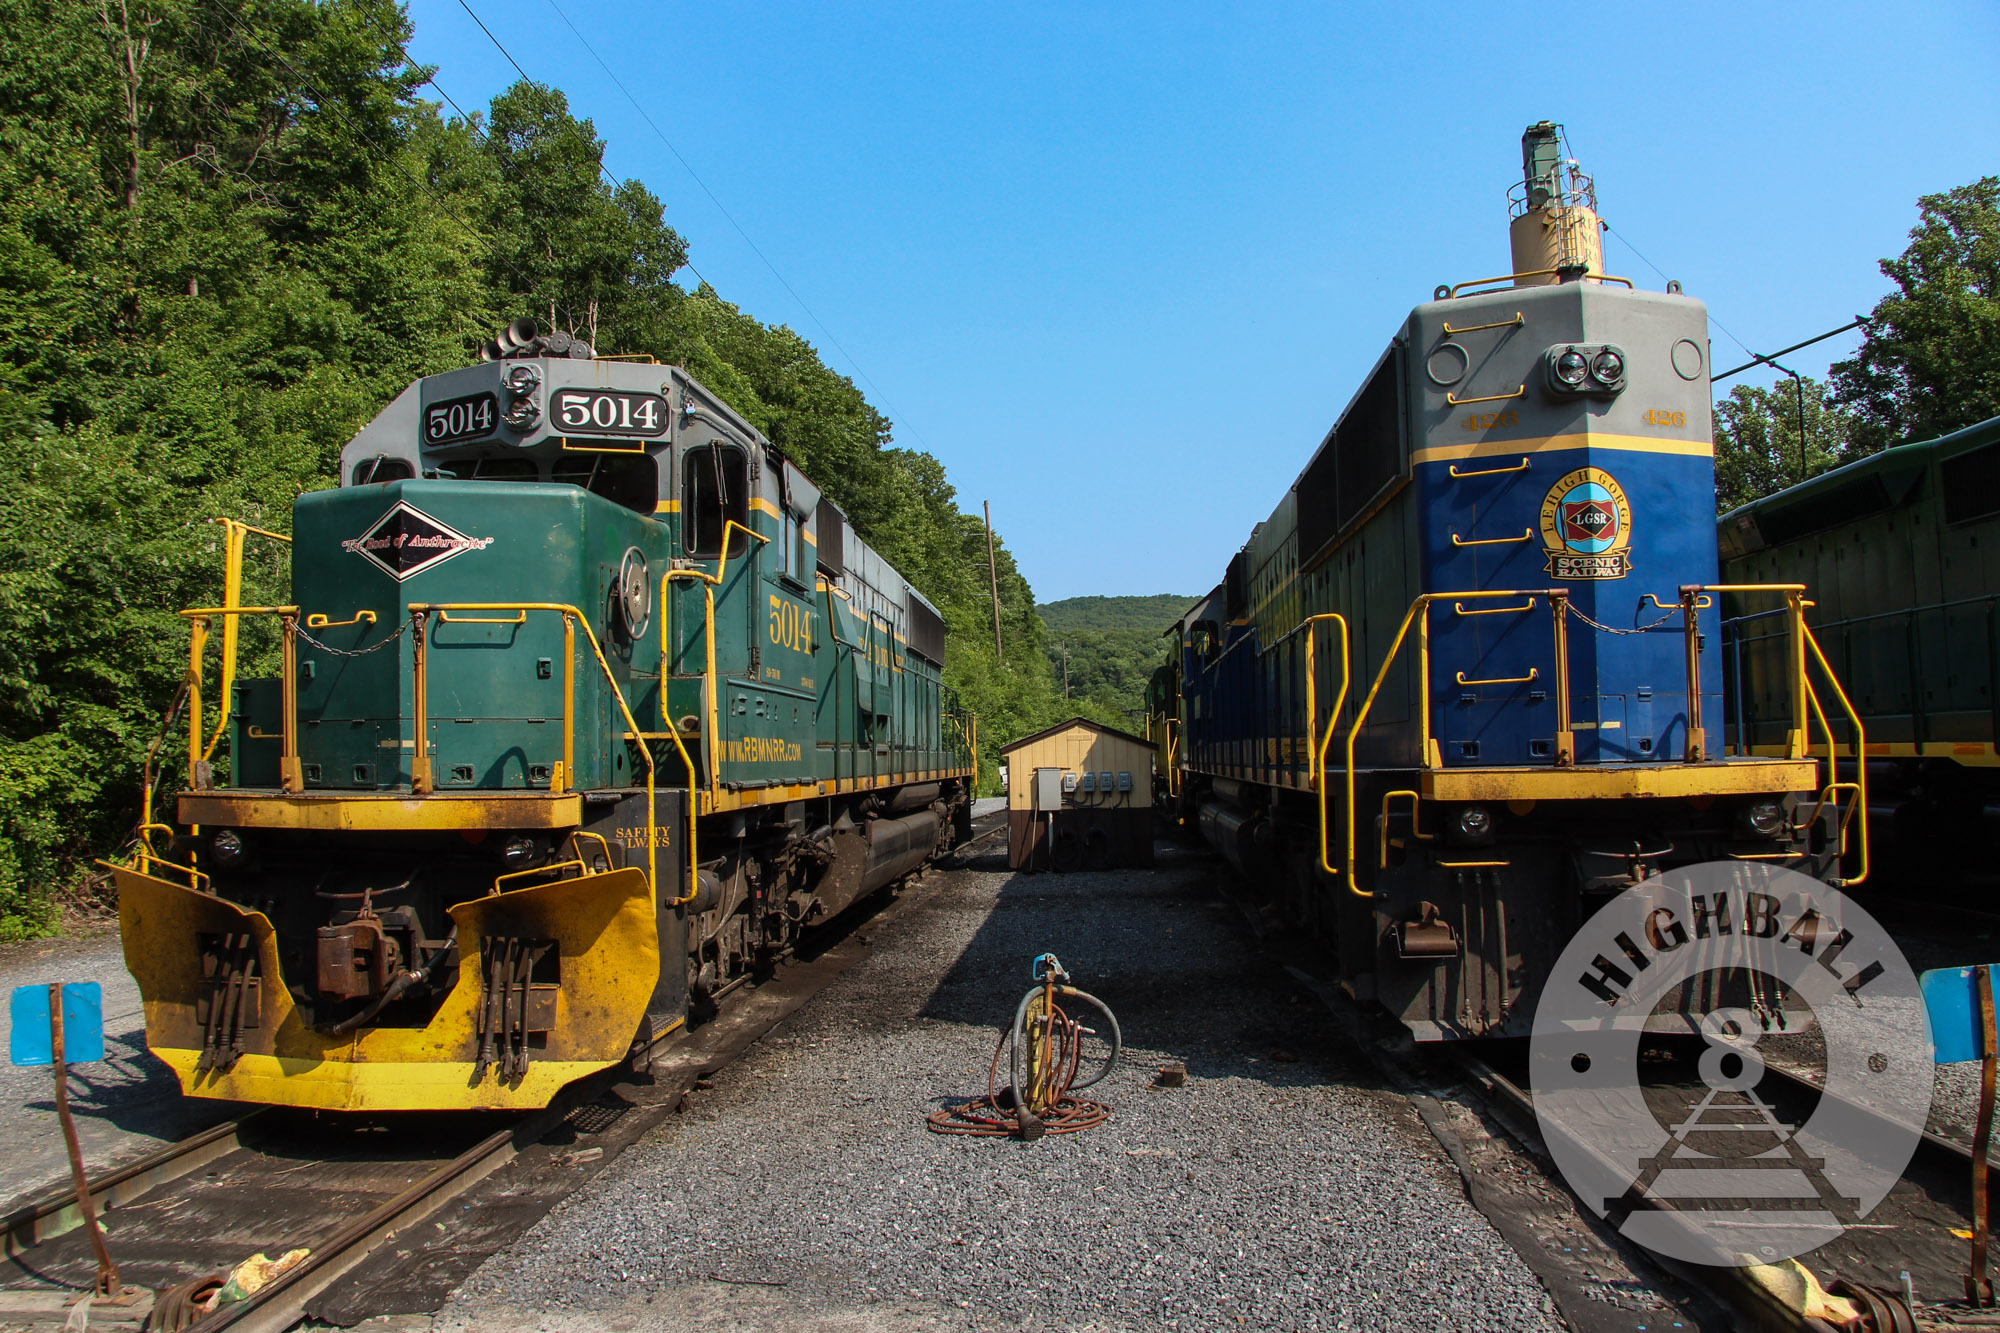 Diesel locomotives outside of the workshops of the Reading Blue Mountain & Northern Railroad, Port Clinton, Pennsylvania, USA, 2016.